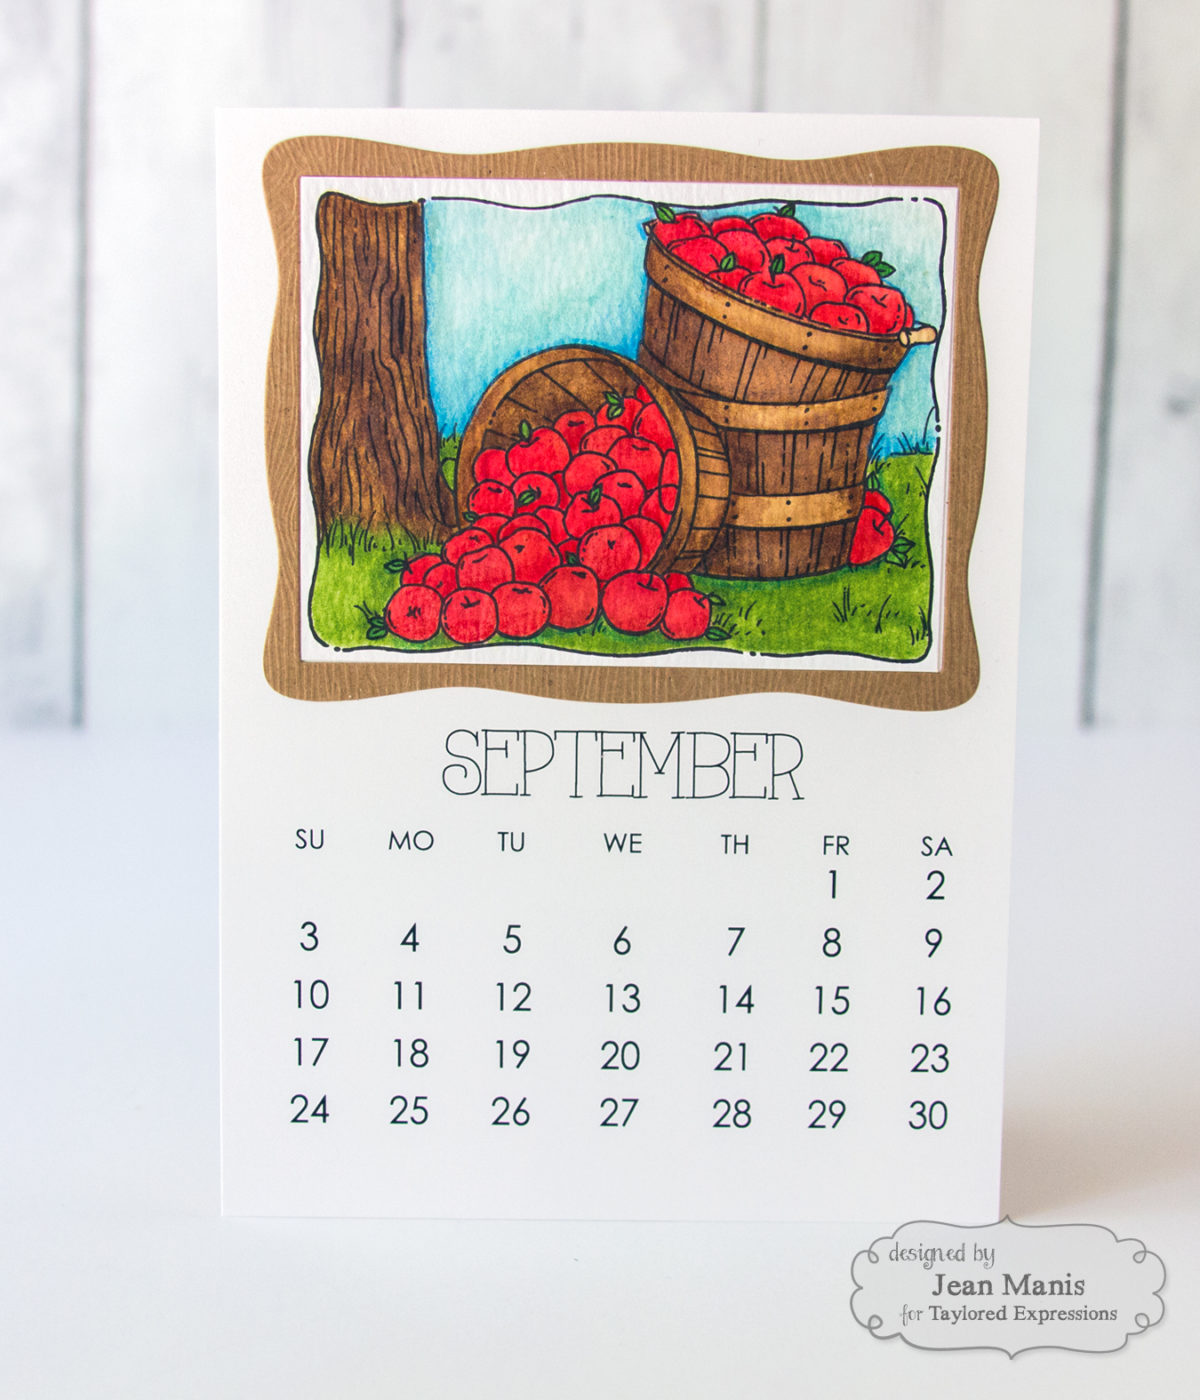 Taylored Expressions – September and October Watercolored Calendar Panels